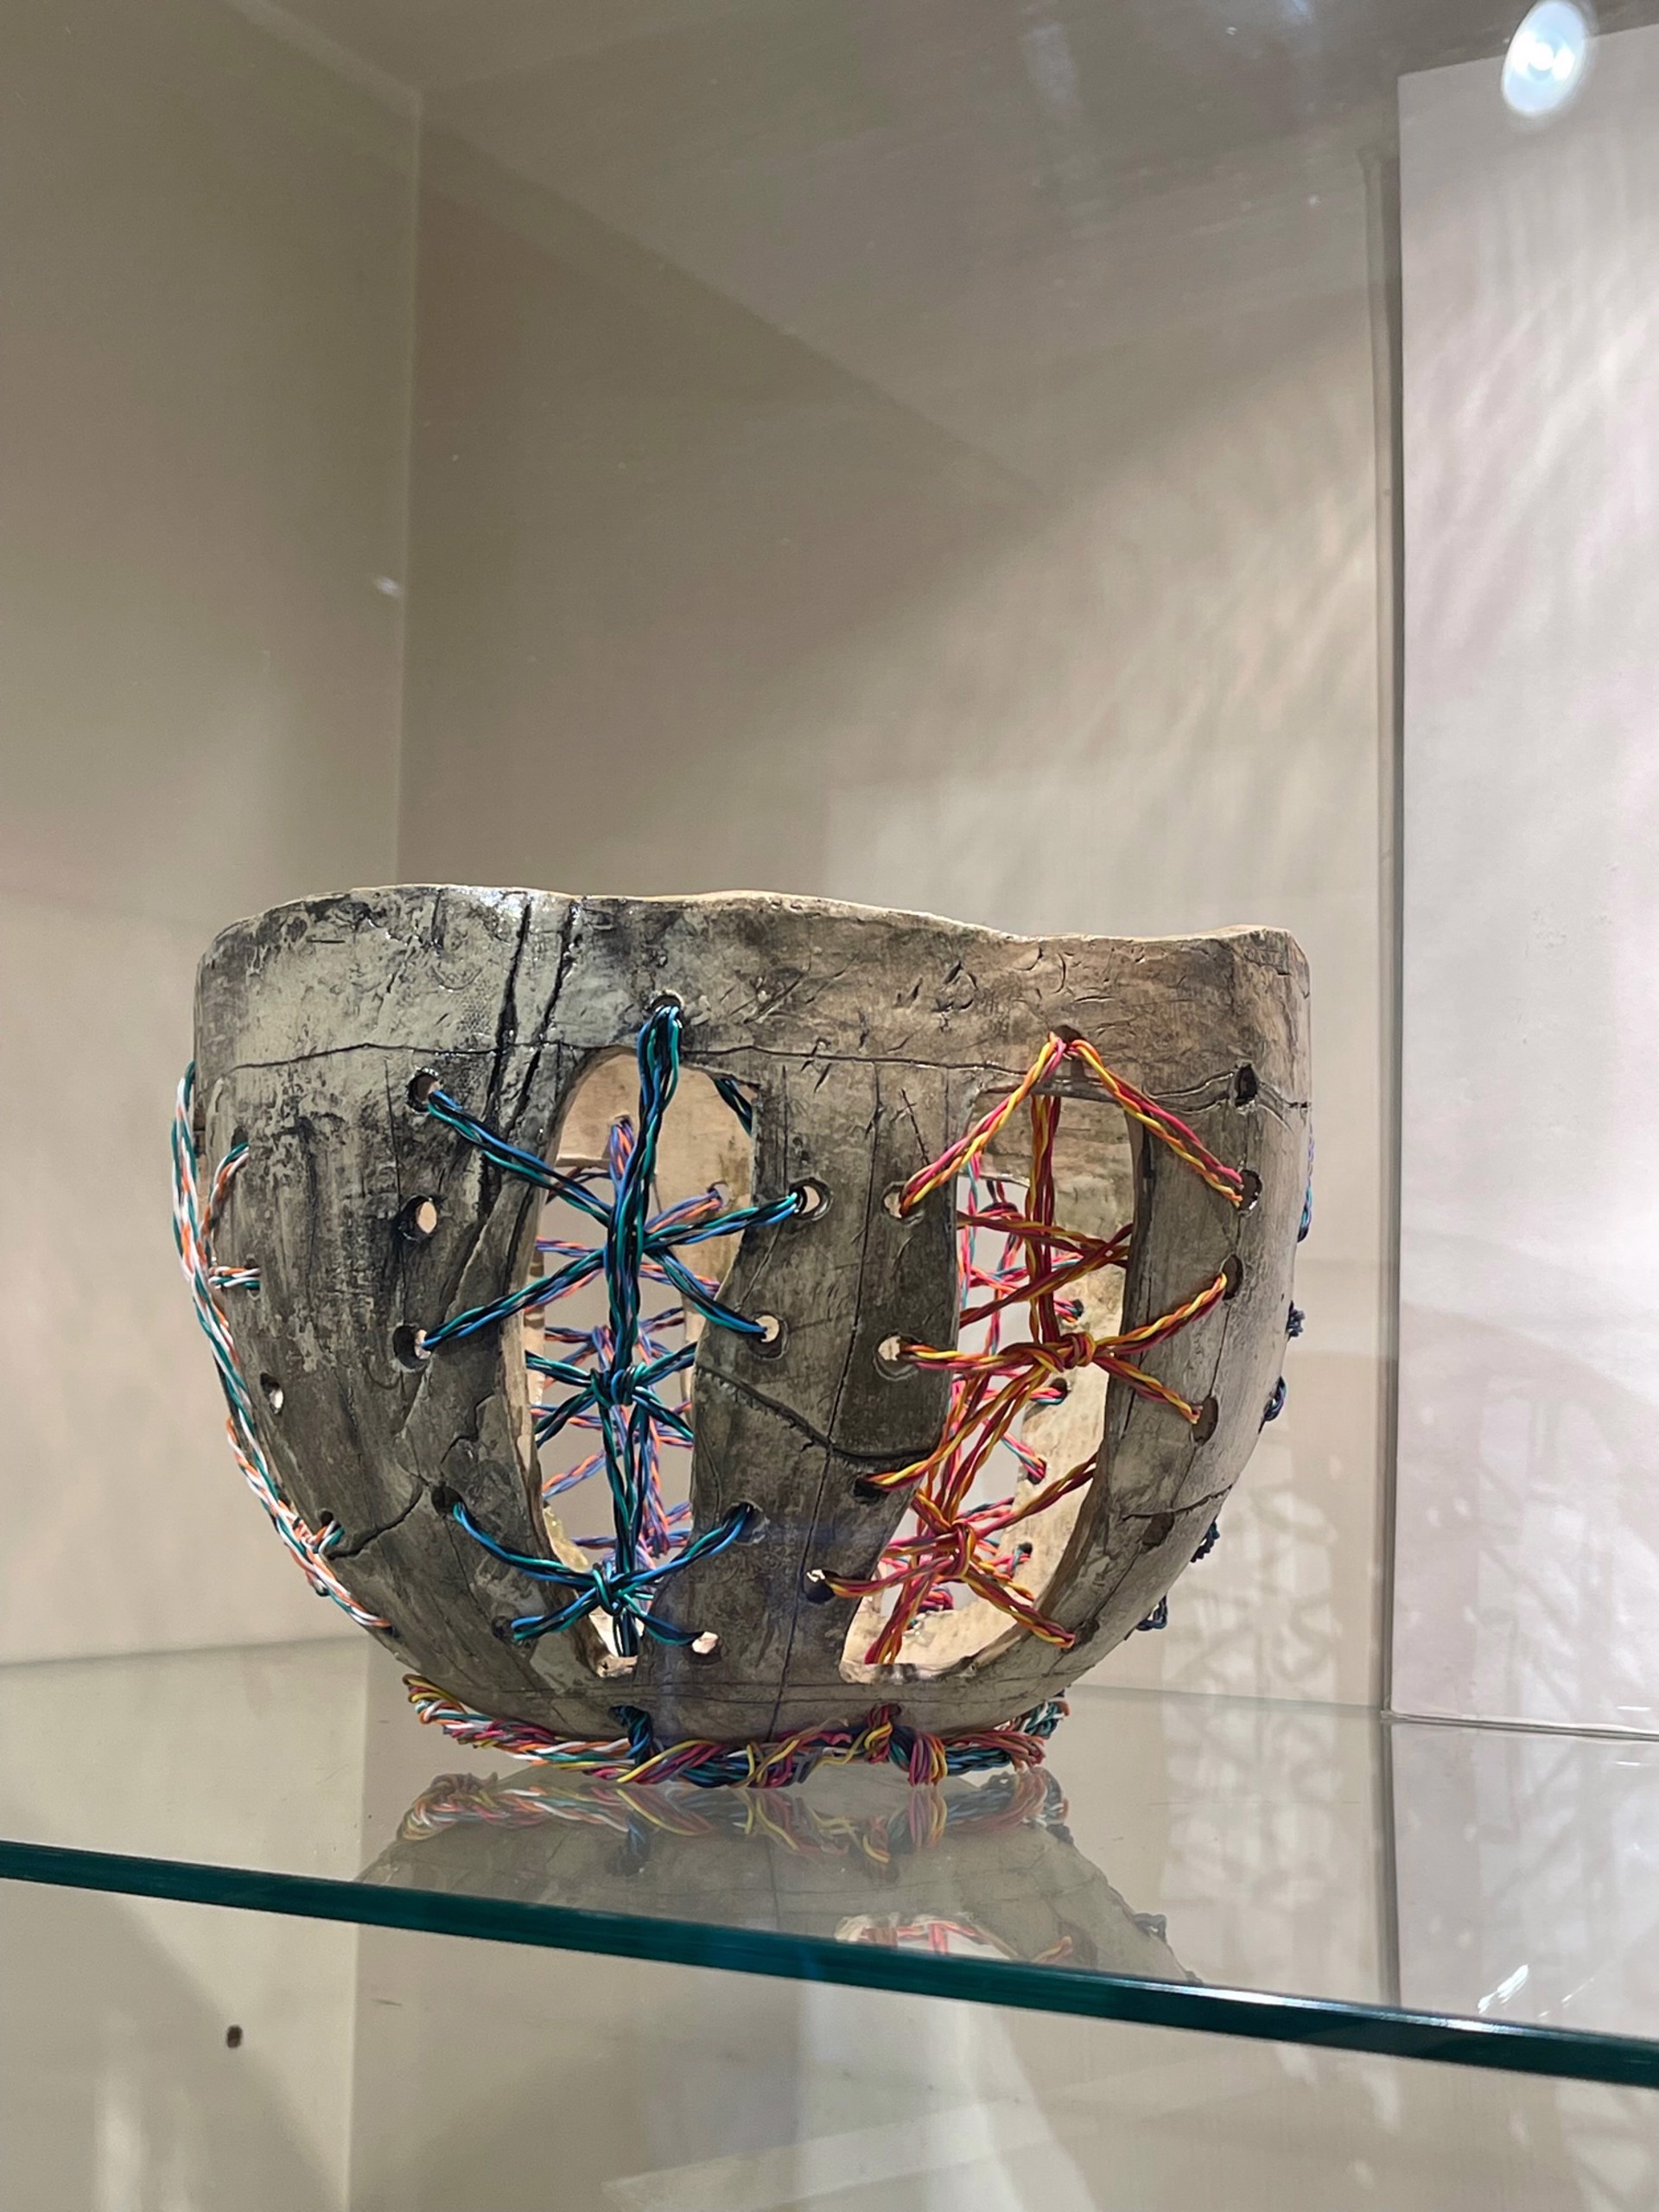 "Telephone Wire Bowl" by Patricia Simpson